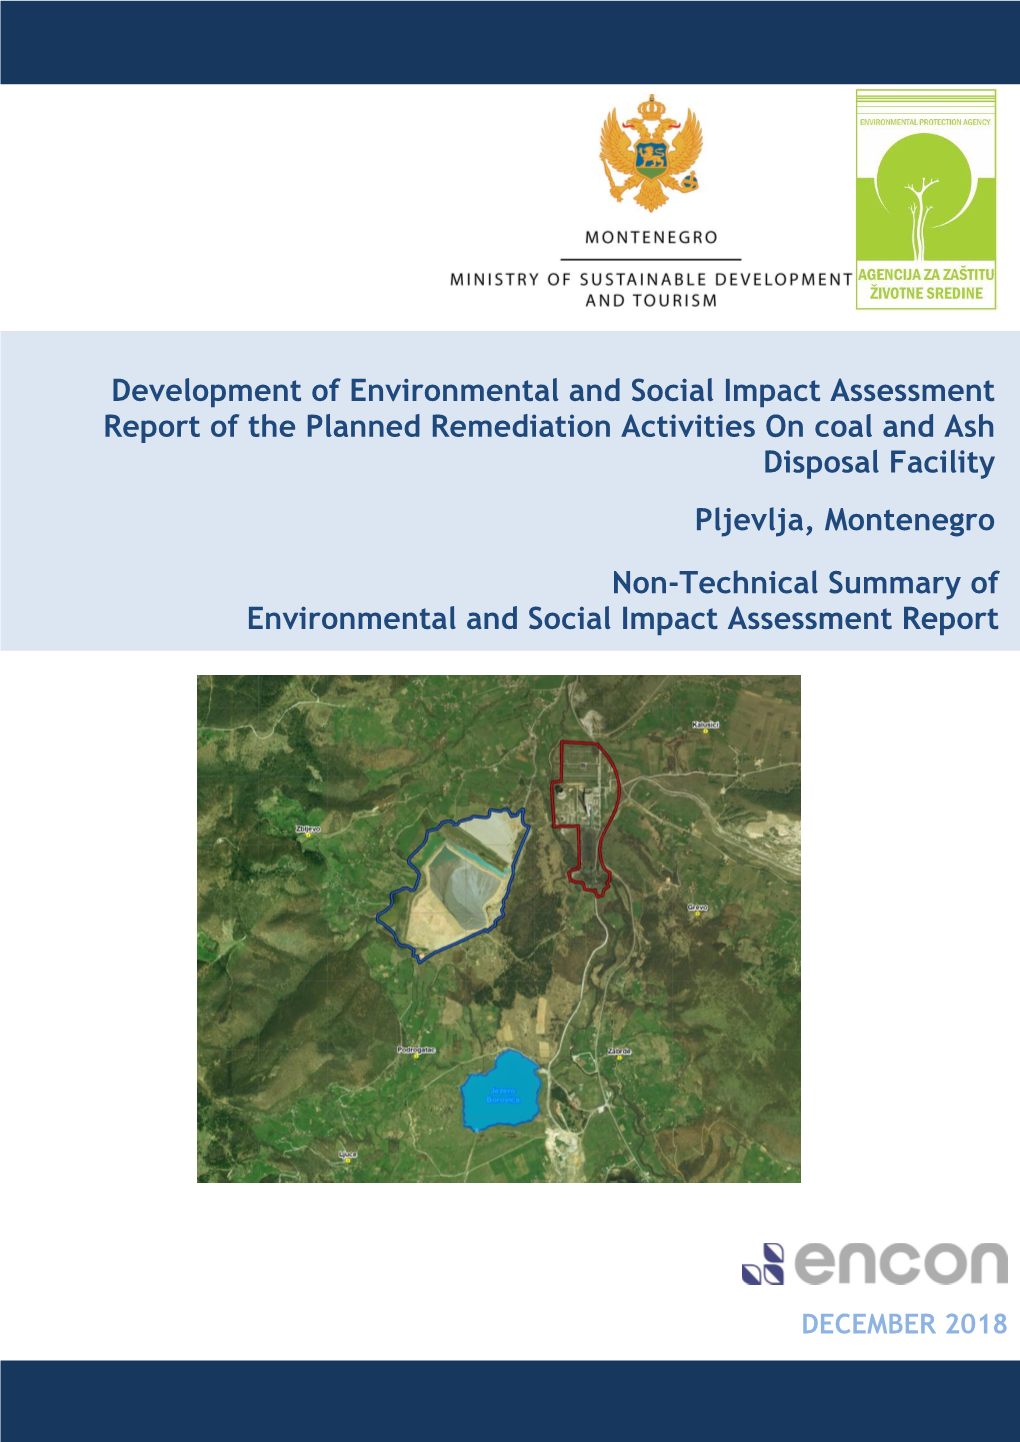 Development of Environmental and Social Impact Assessment Report of the Planned Remediation Activities on Coal and Ash Disposal Facility